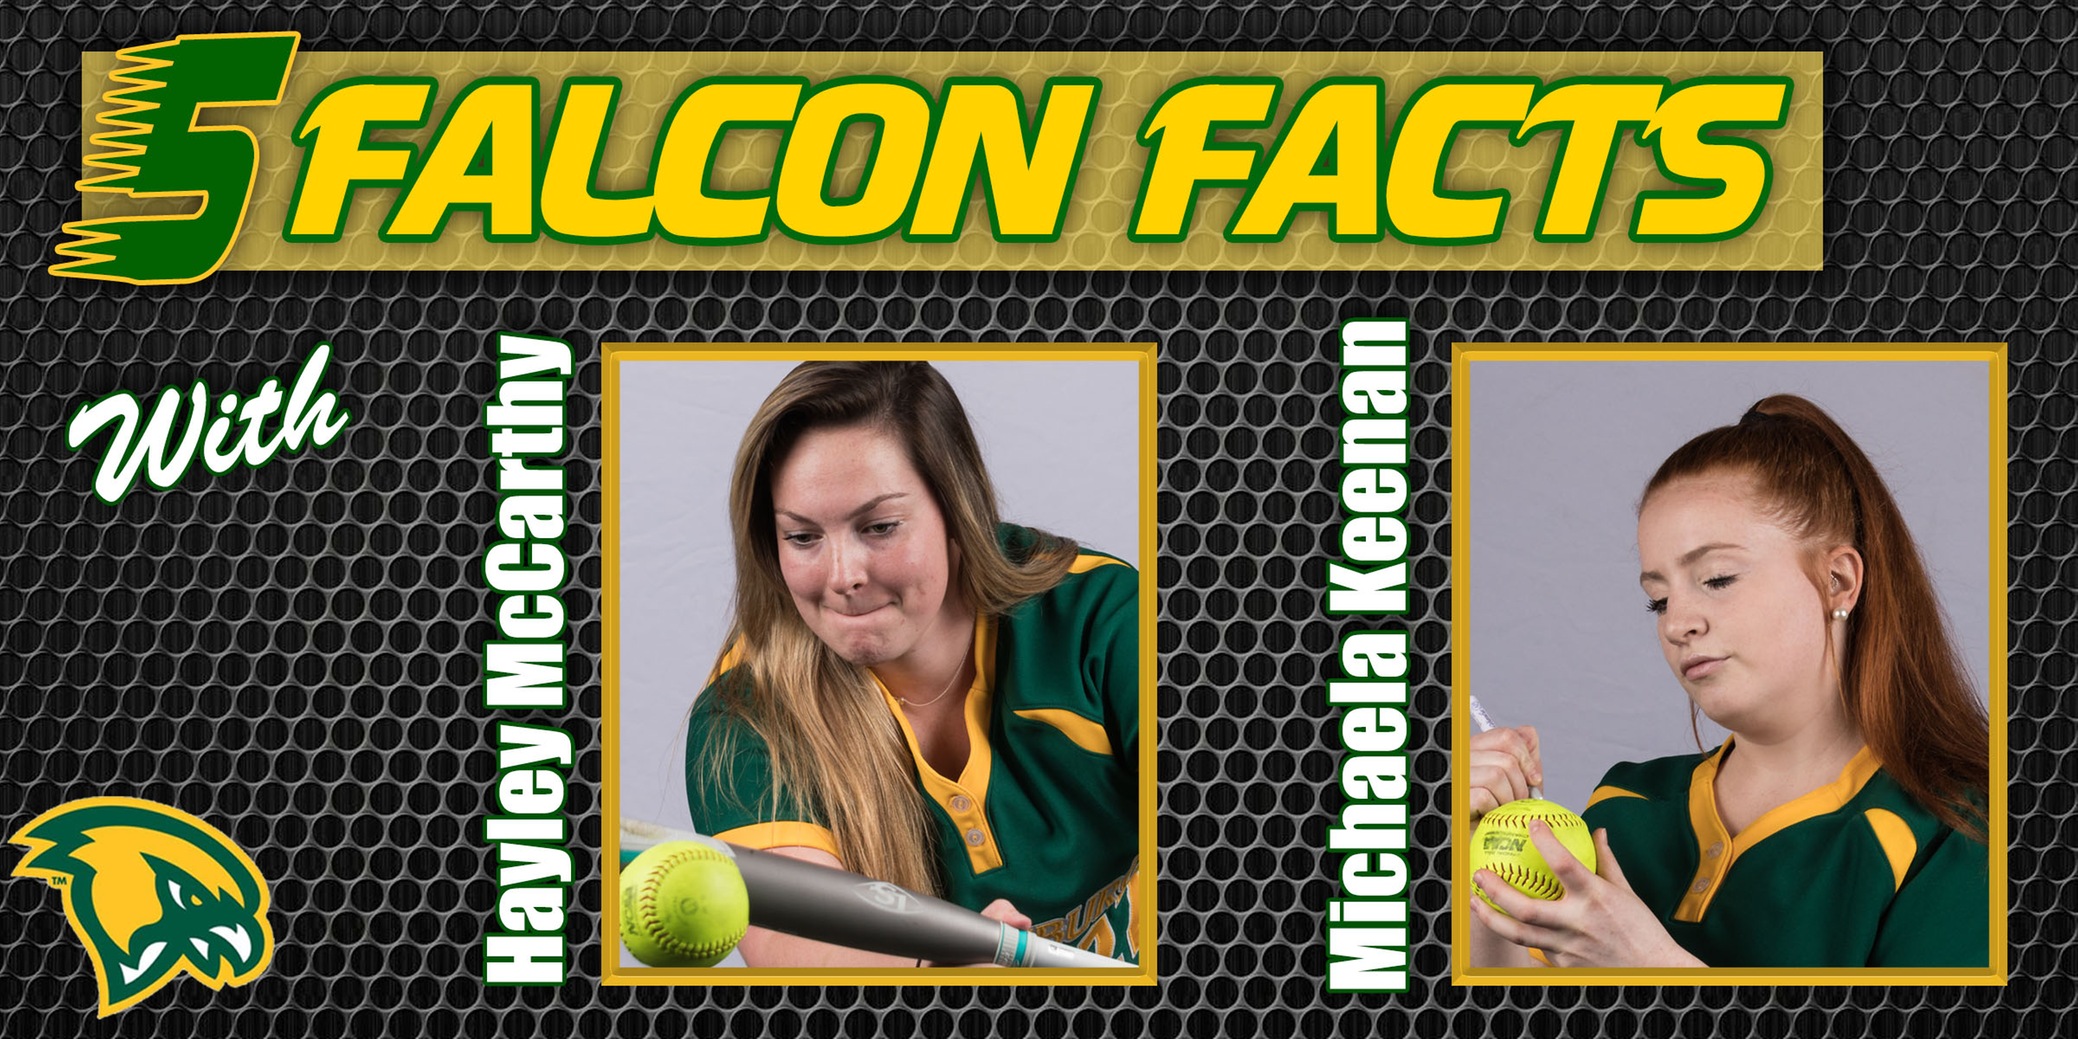 Five Falcon Facts with McCarthy & Keenan